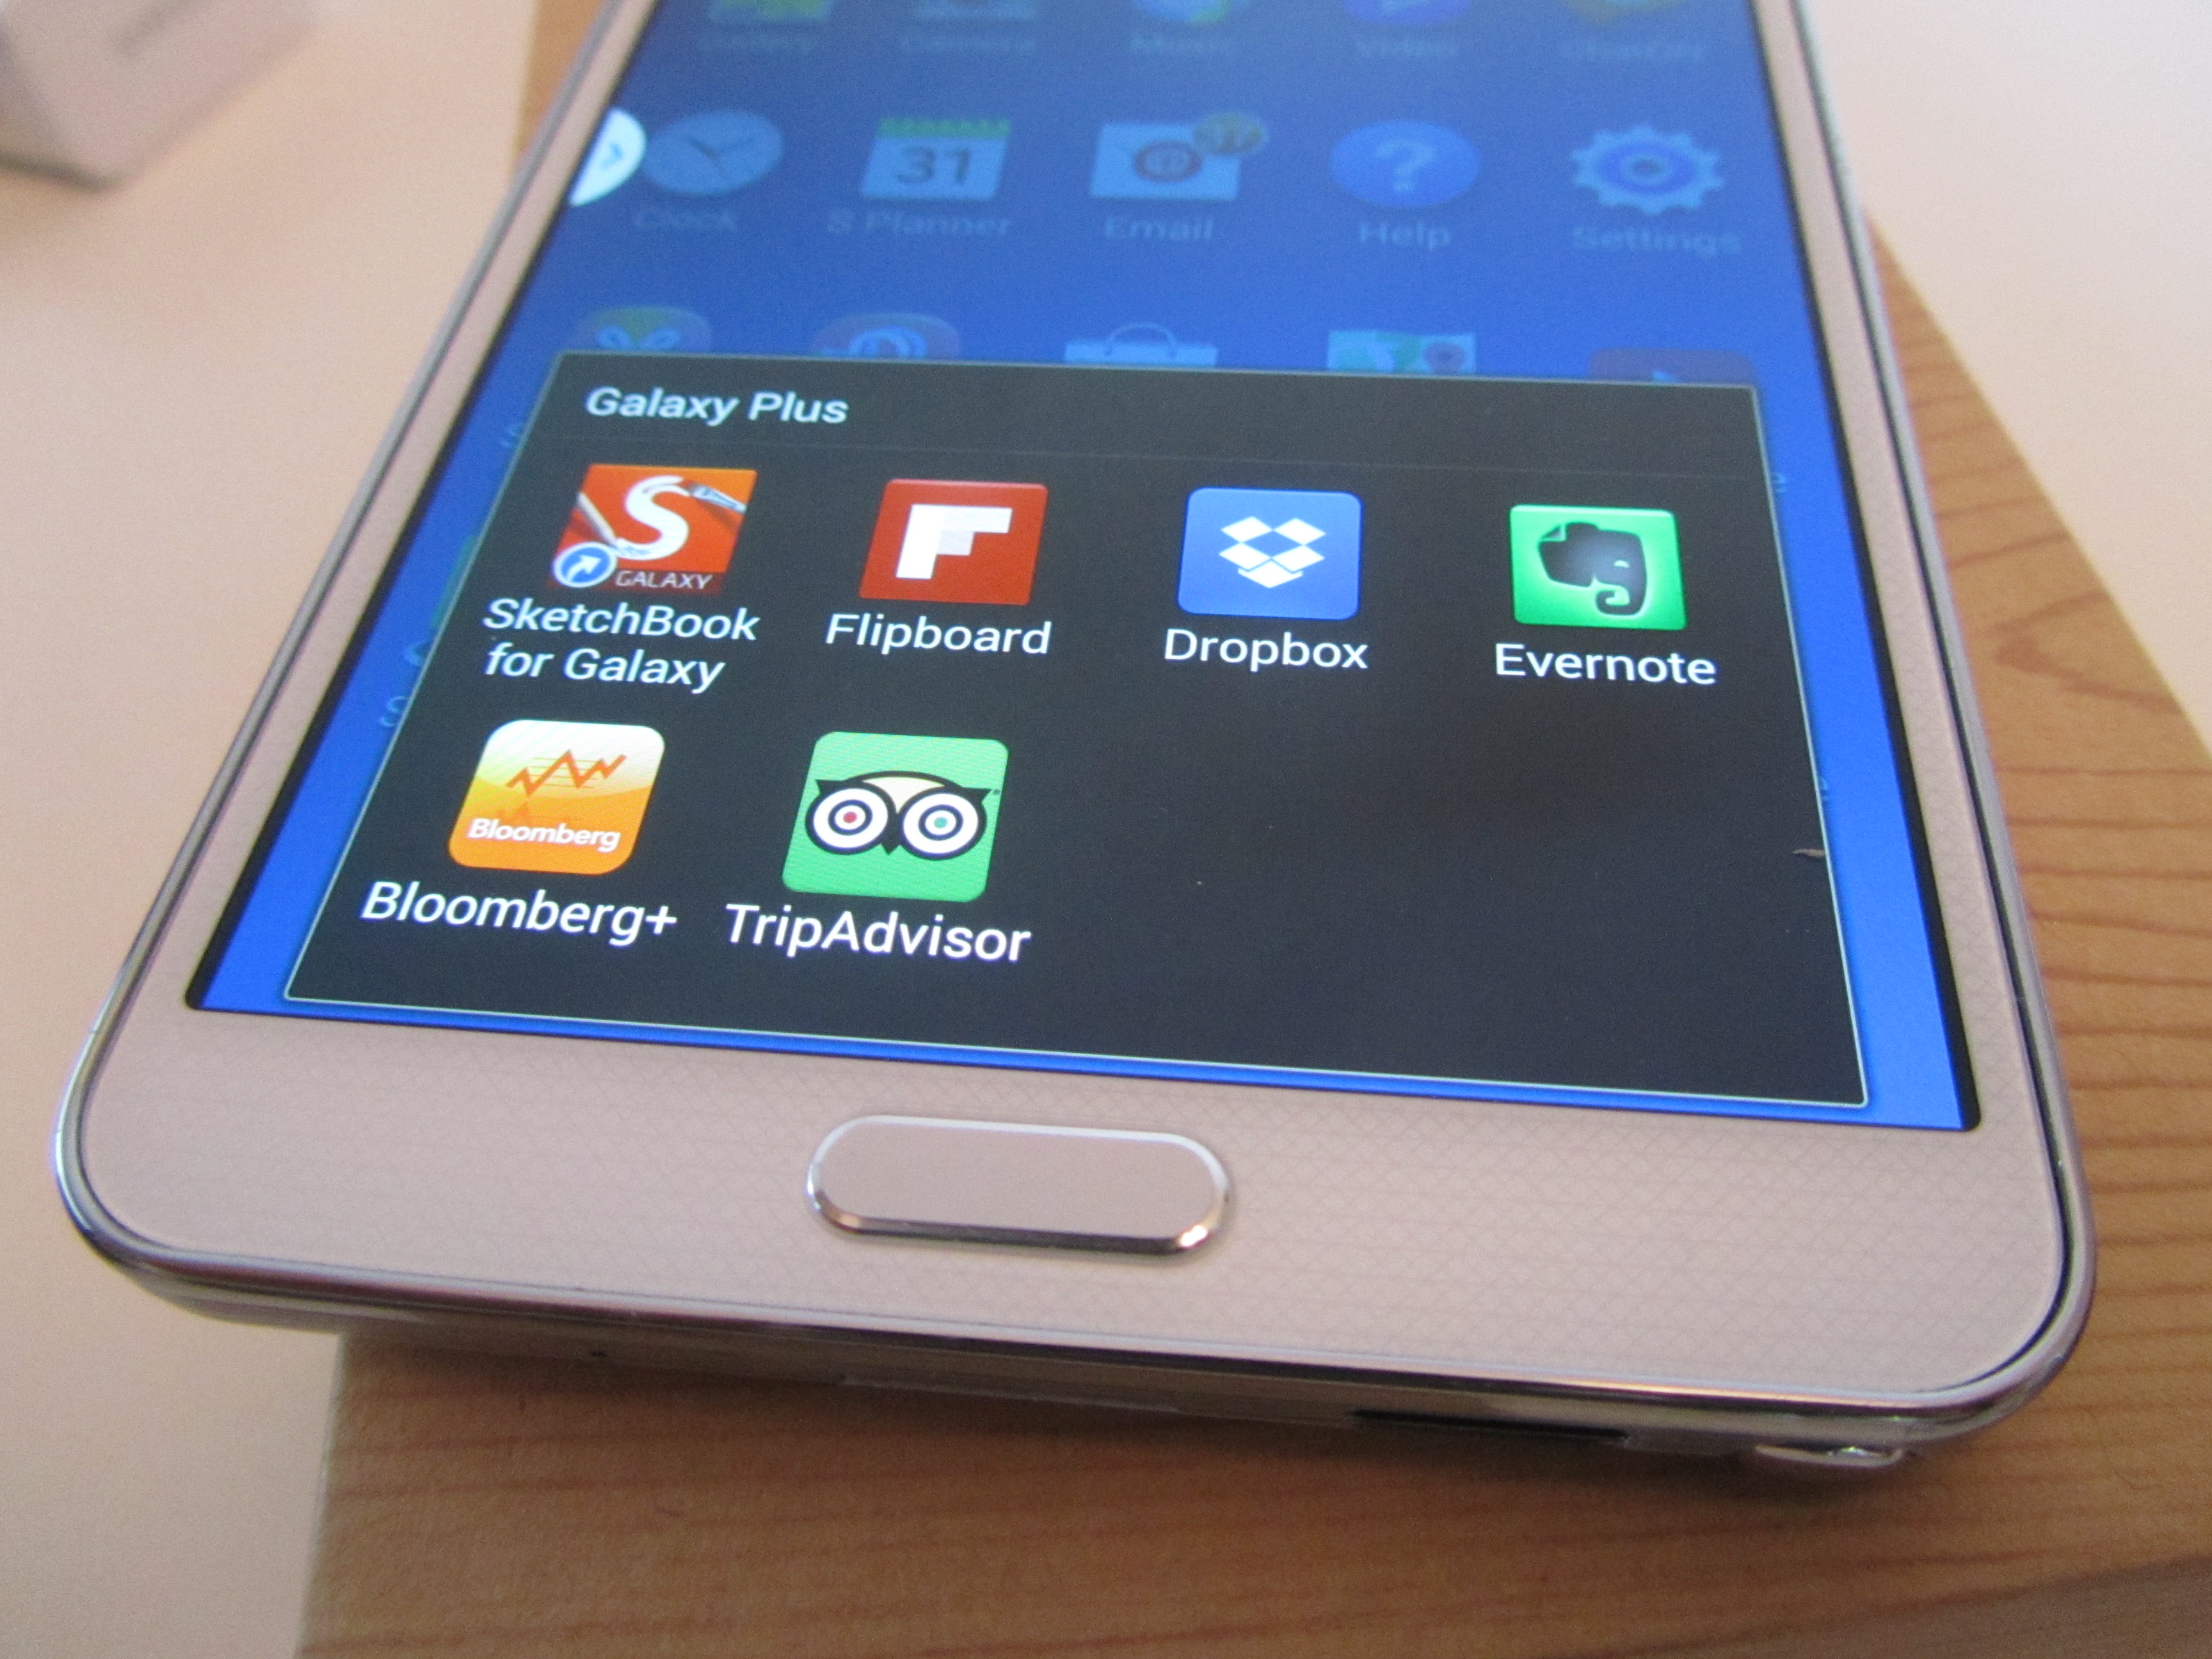 Note3 apps Samsung Galaxy Note 3 review: One of the best Android handsets money can buy, if you can hold it